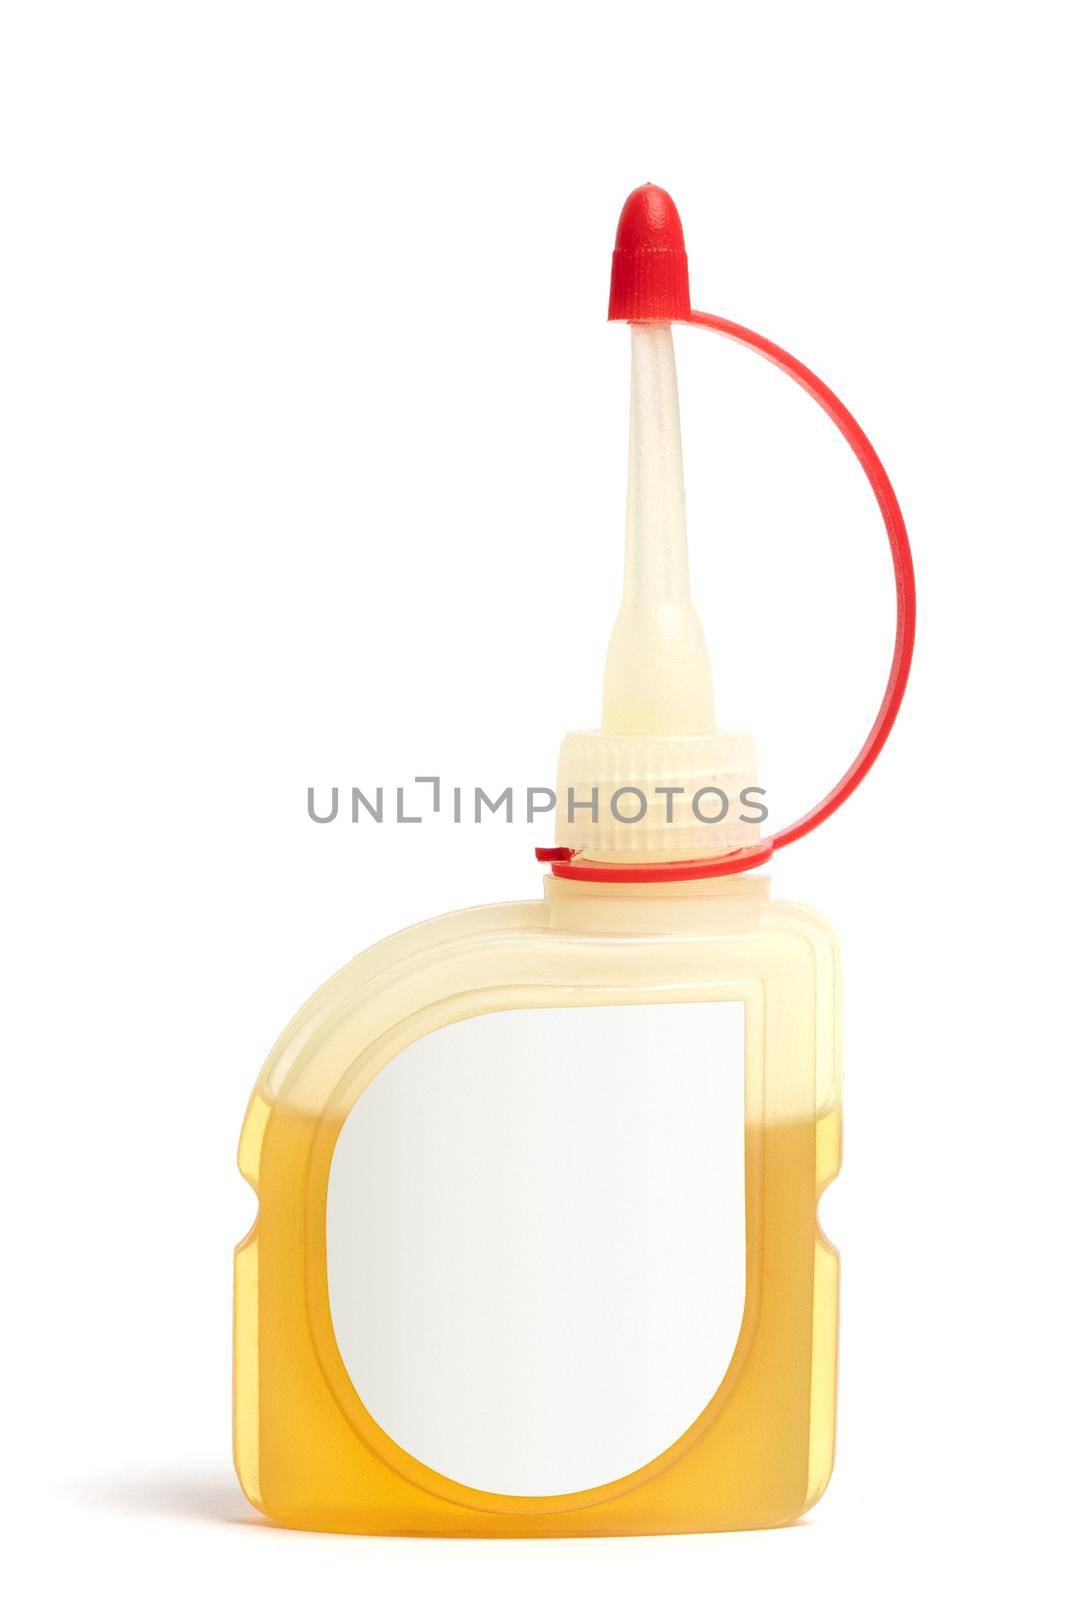 A small polyethylene oiler with a household oil and a blank label for mock up, isolated on white background